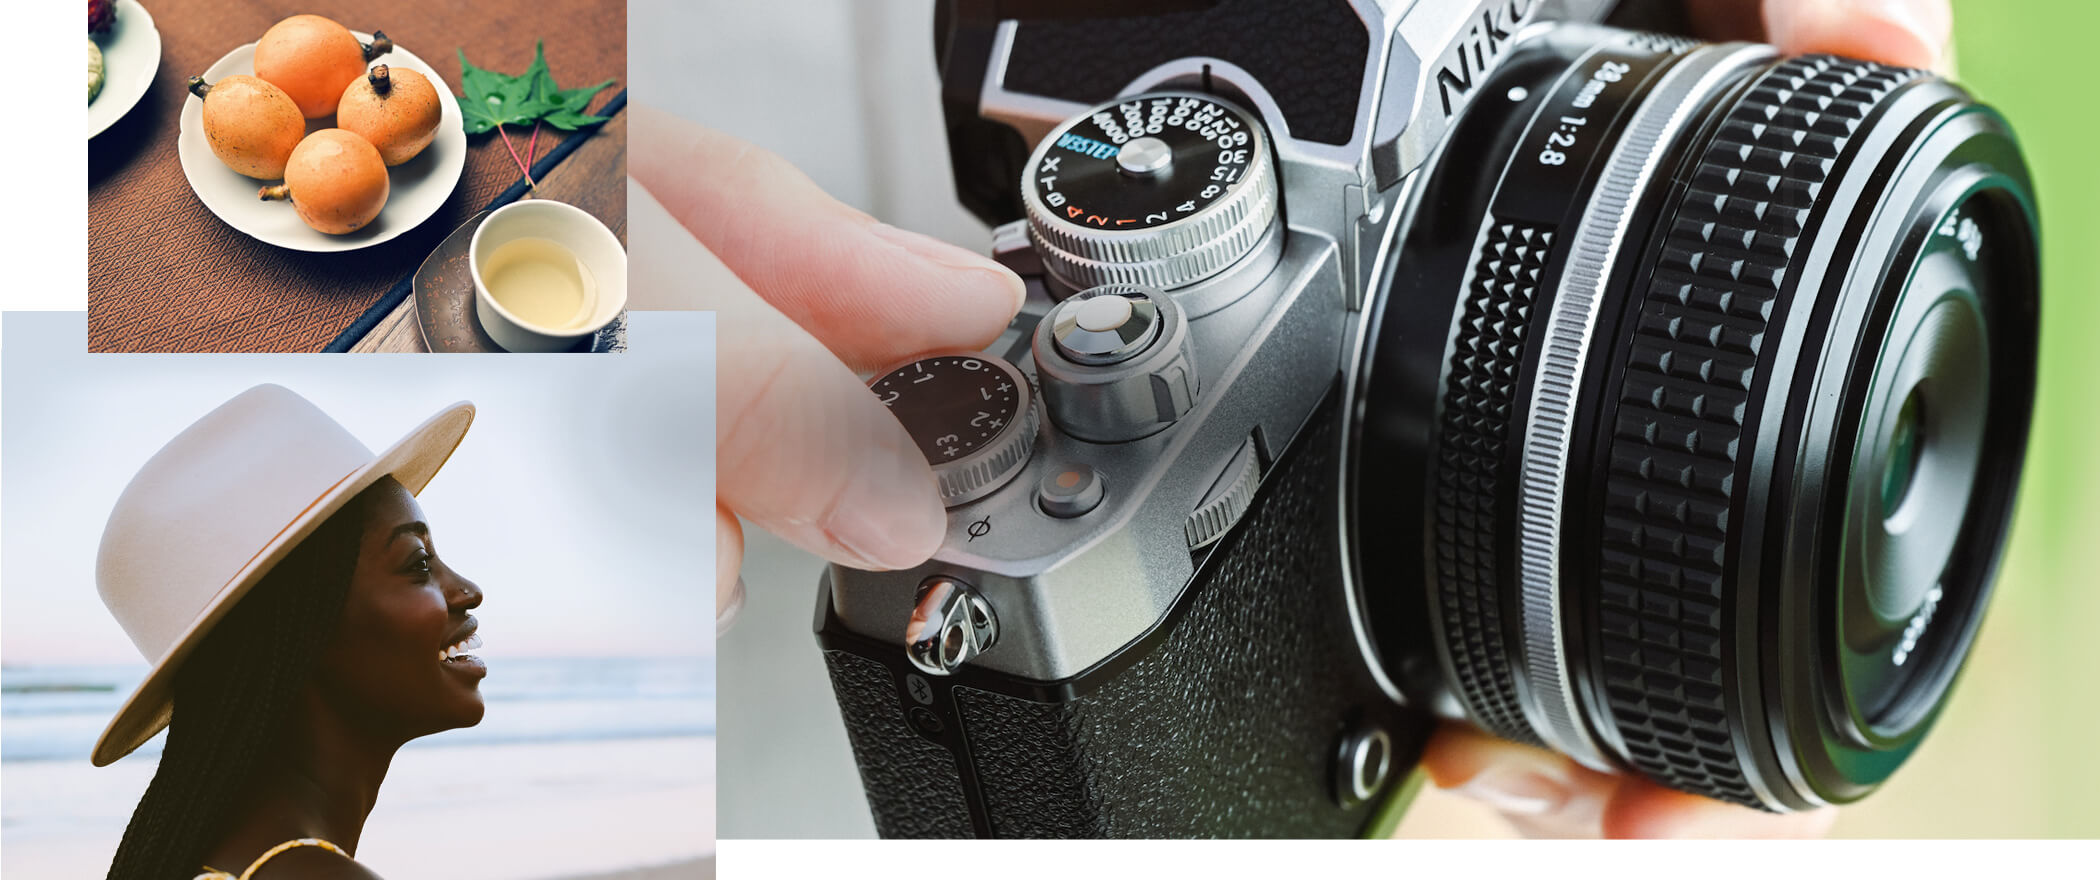 Collage of photos taken with the NIKKOR Z 28mm f/2.8 (SE) lens and of the Z fc and lens in a person's hand